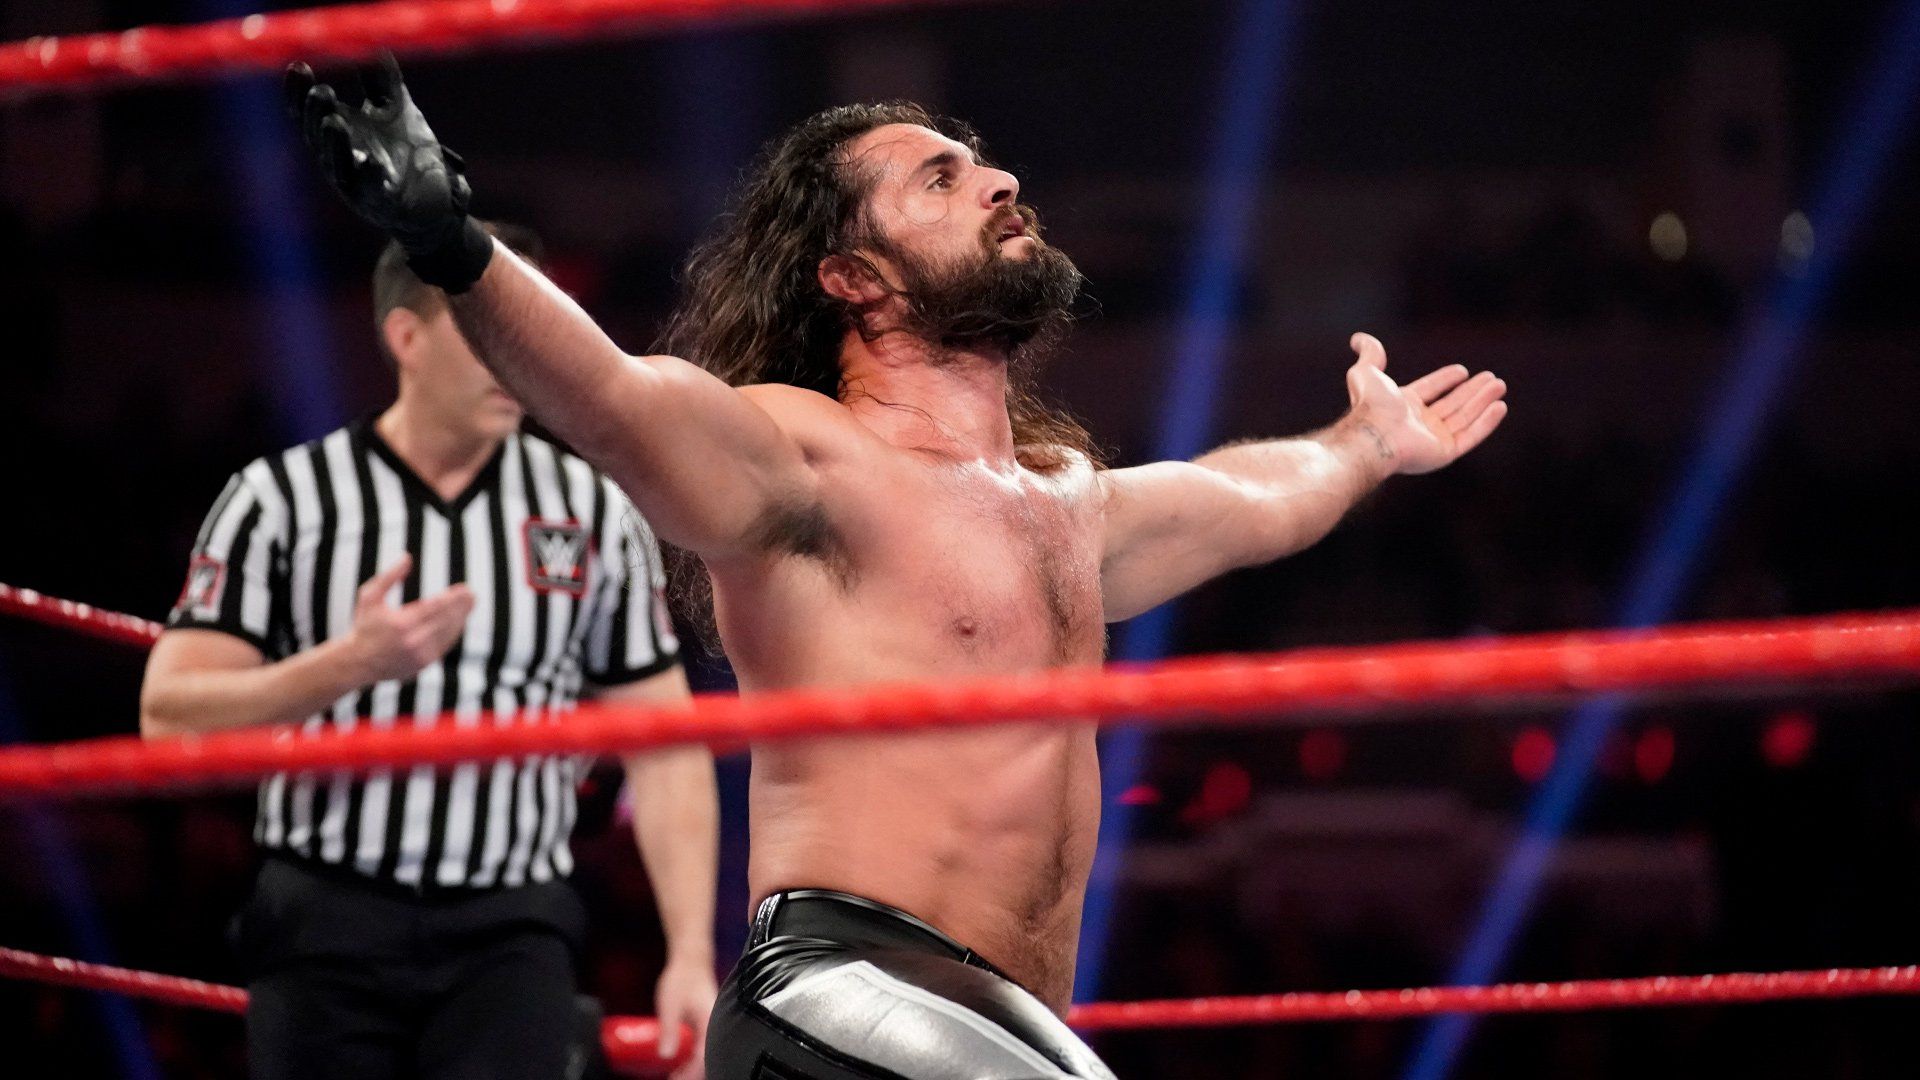 This week in WWE GIFs: The Monday Night Messiah glad.